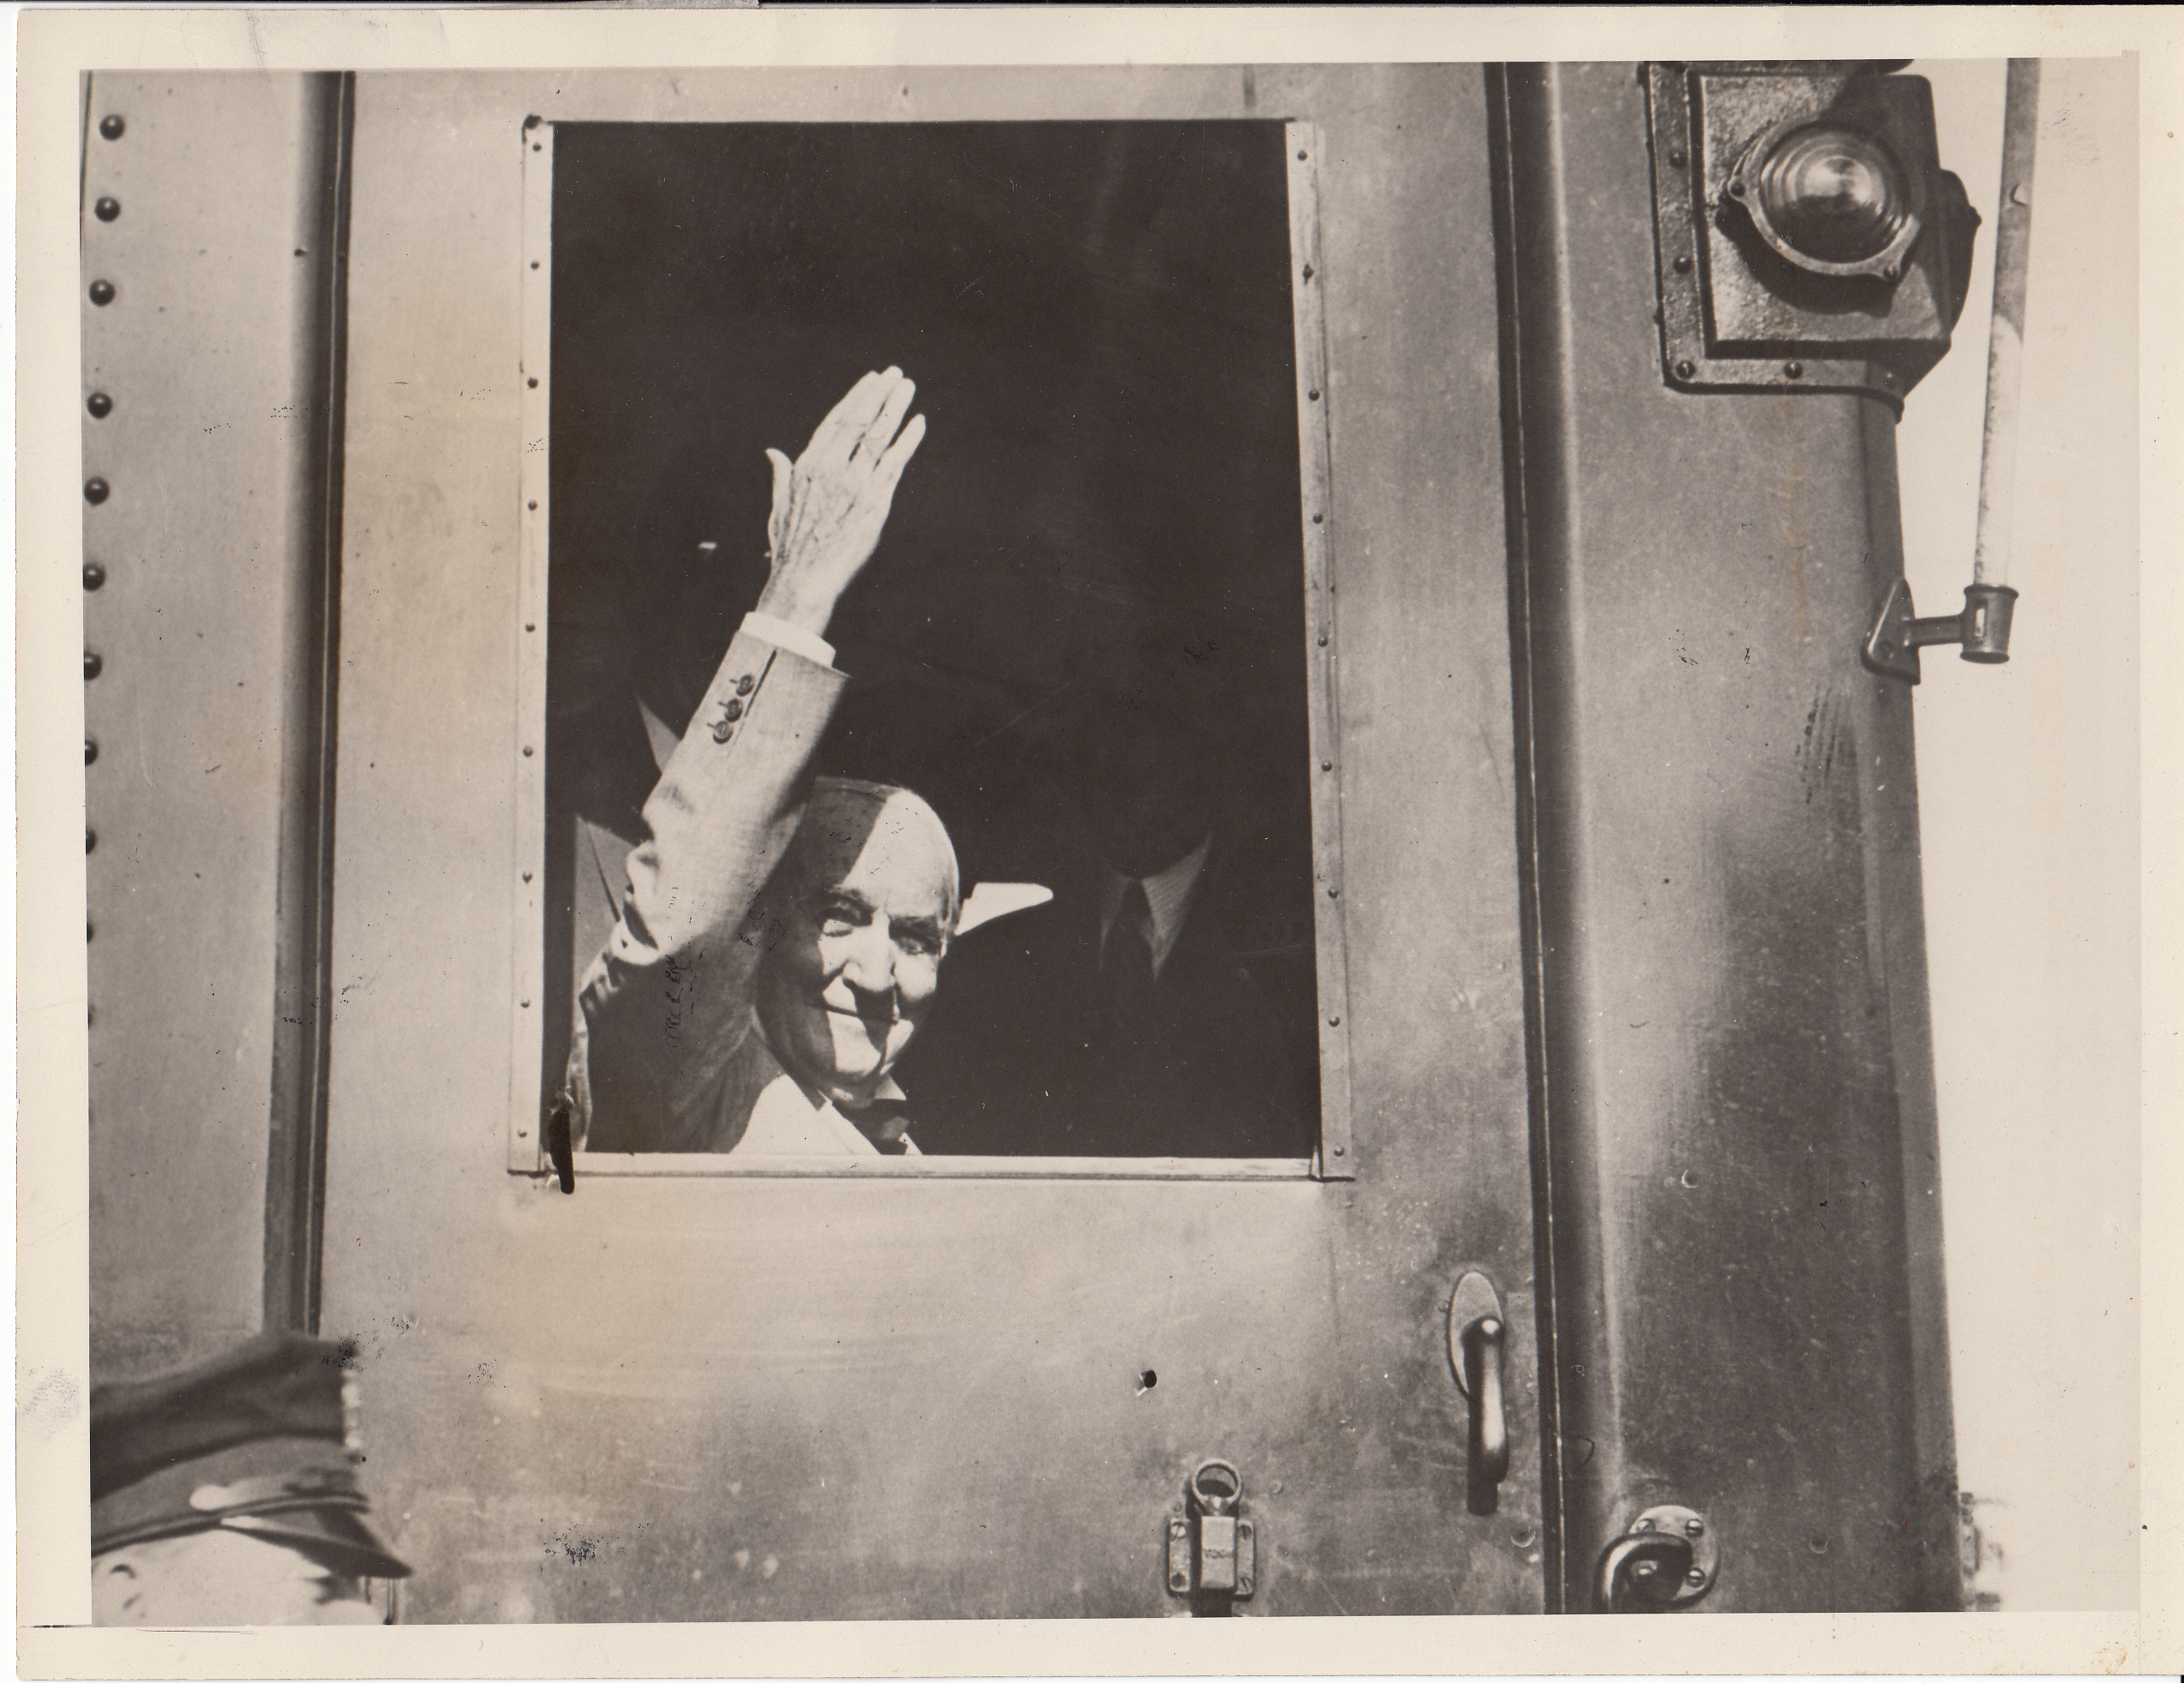 Thomas Edison waving as he drives the first electric train on the Lackawanna Railroad.